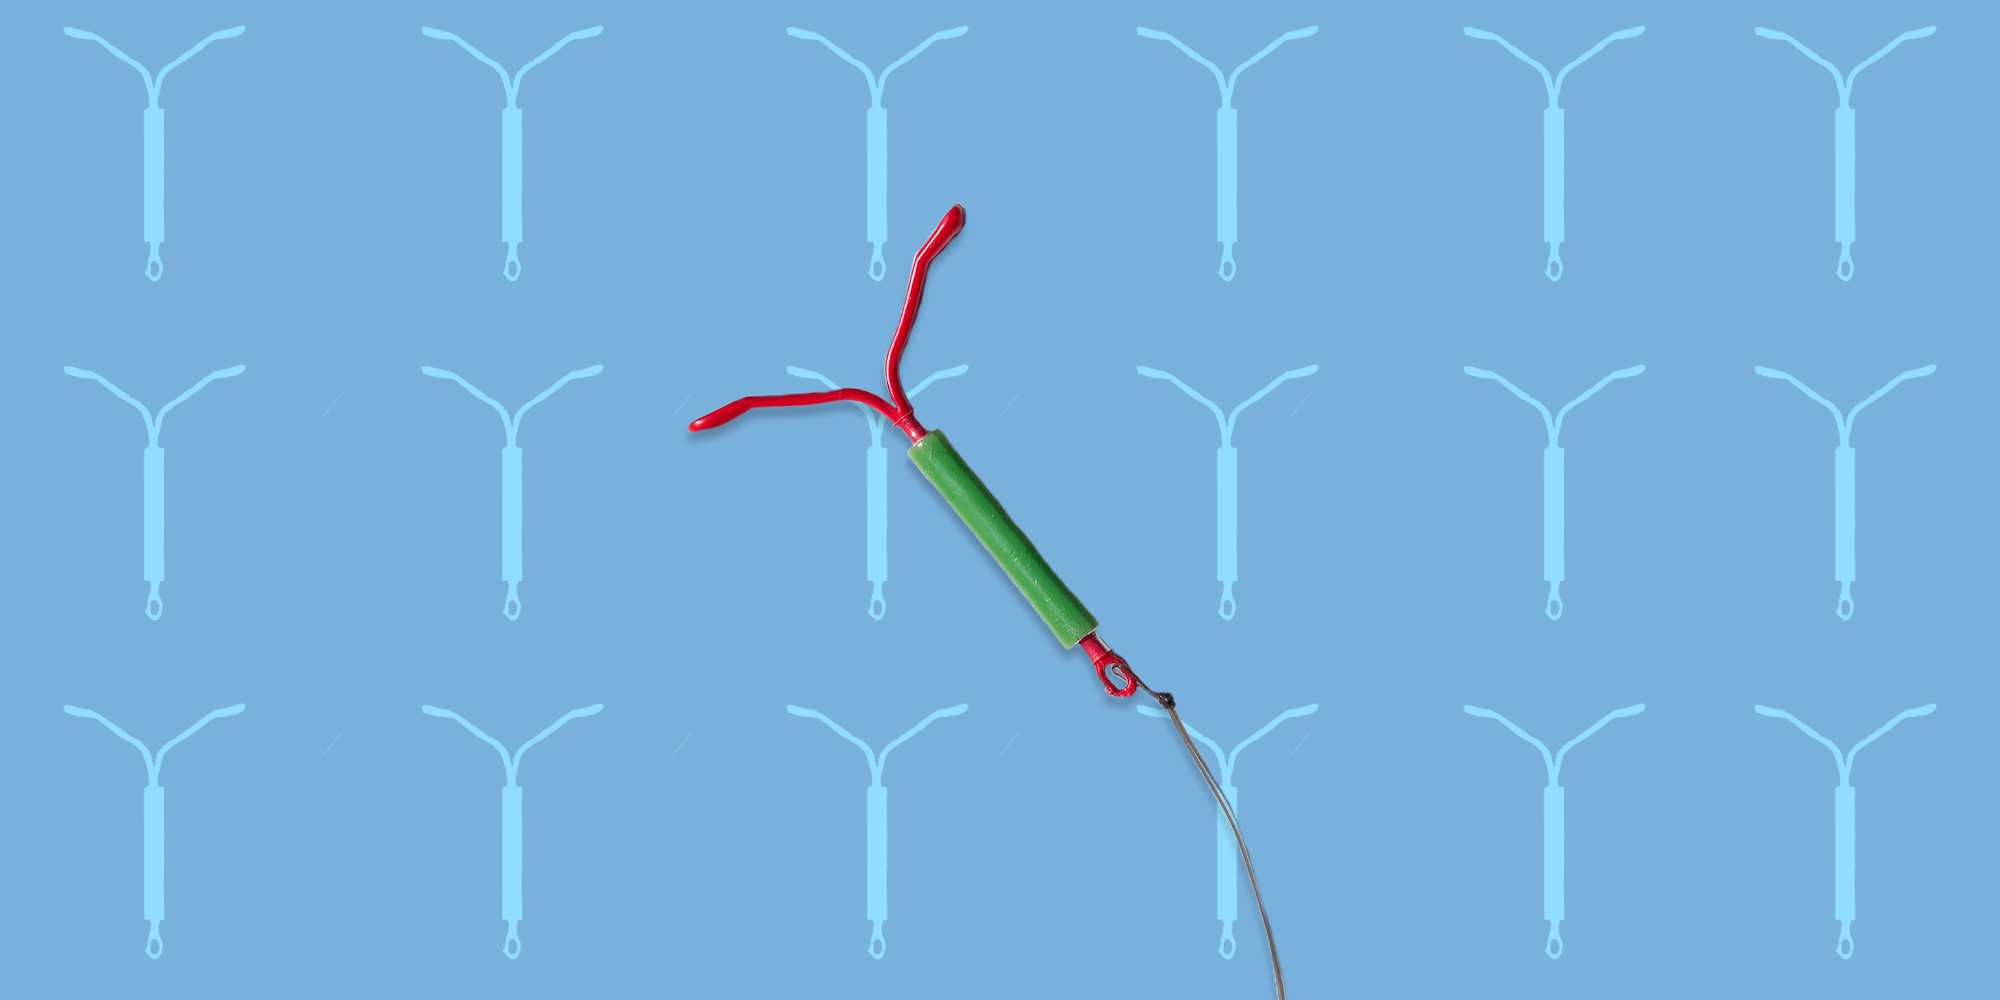 IUD Insertion Process - How Much Does It Hurt to Get an IUD?